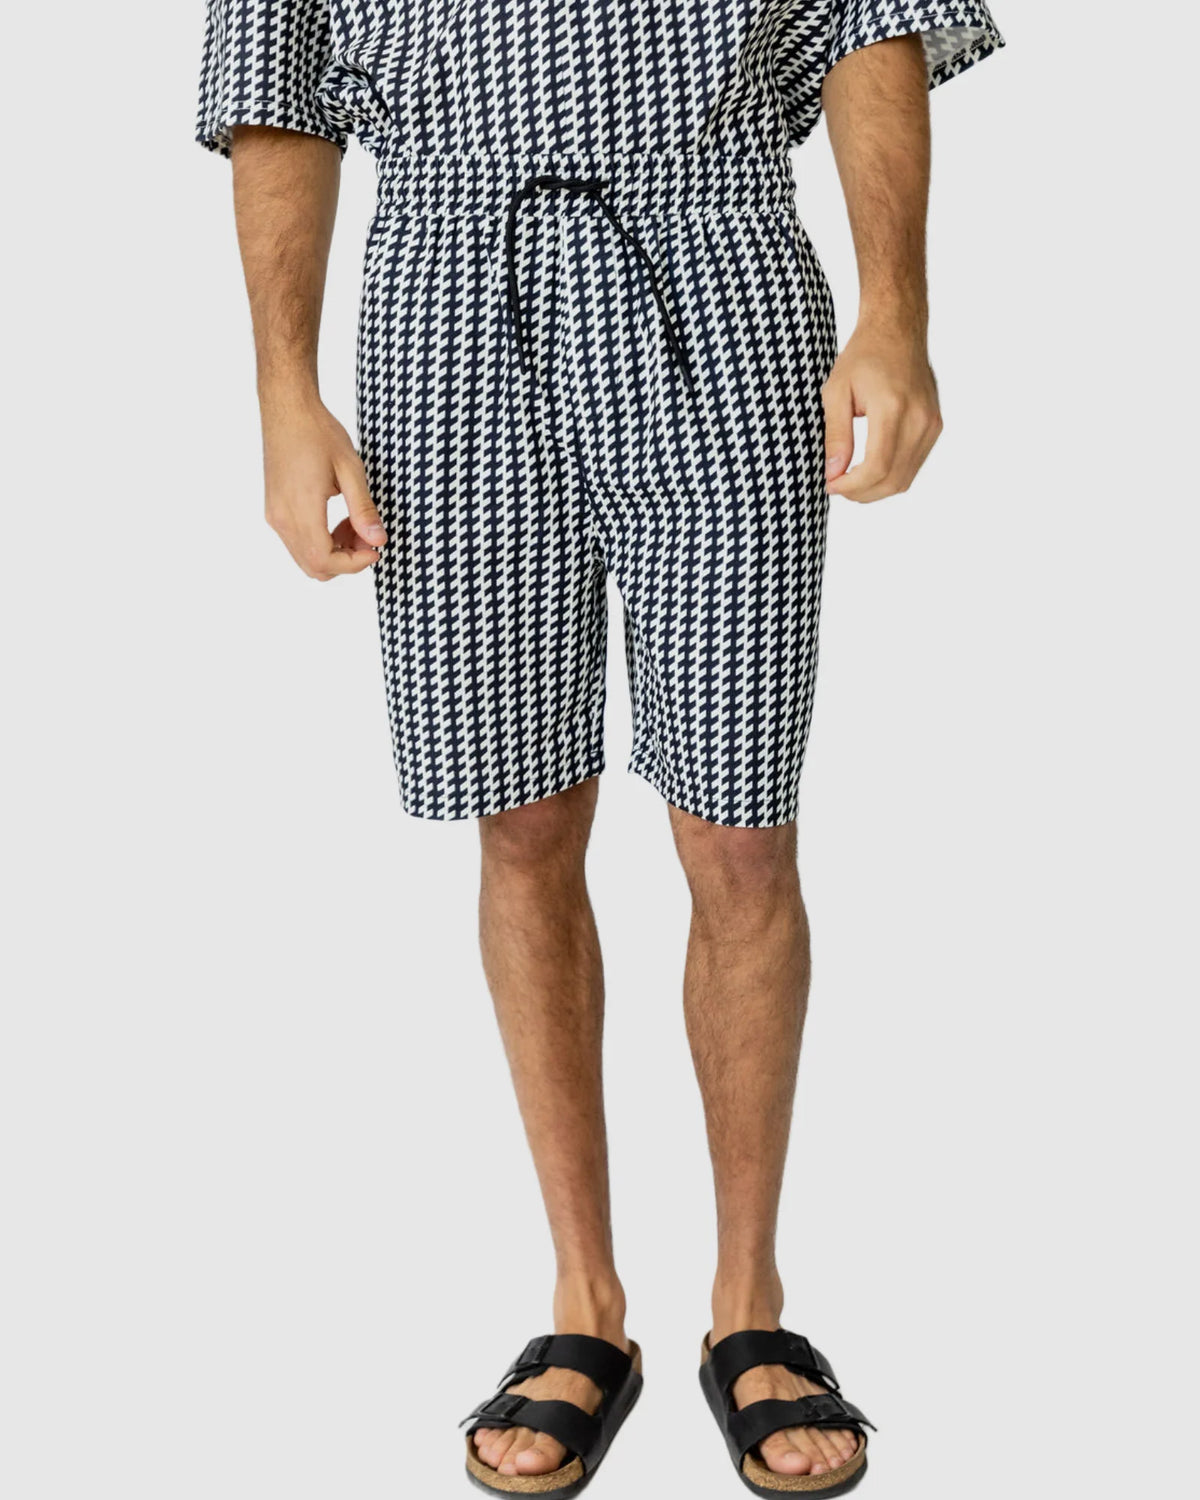 Justin Cassin Mulholland Print Tie Shorts in Black/White Color